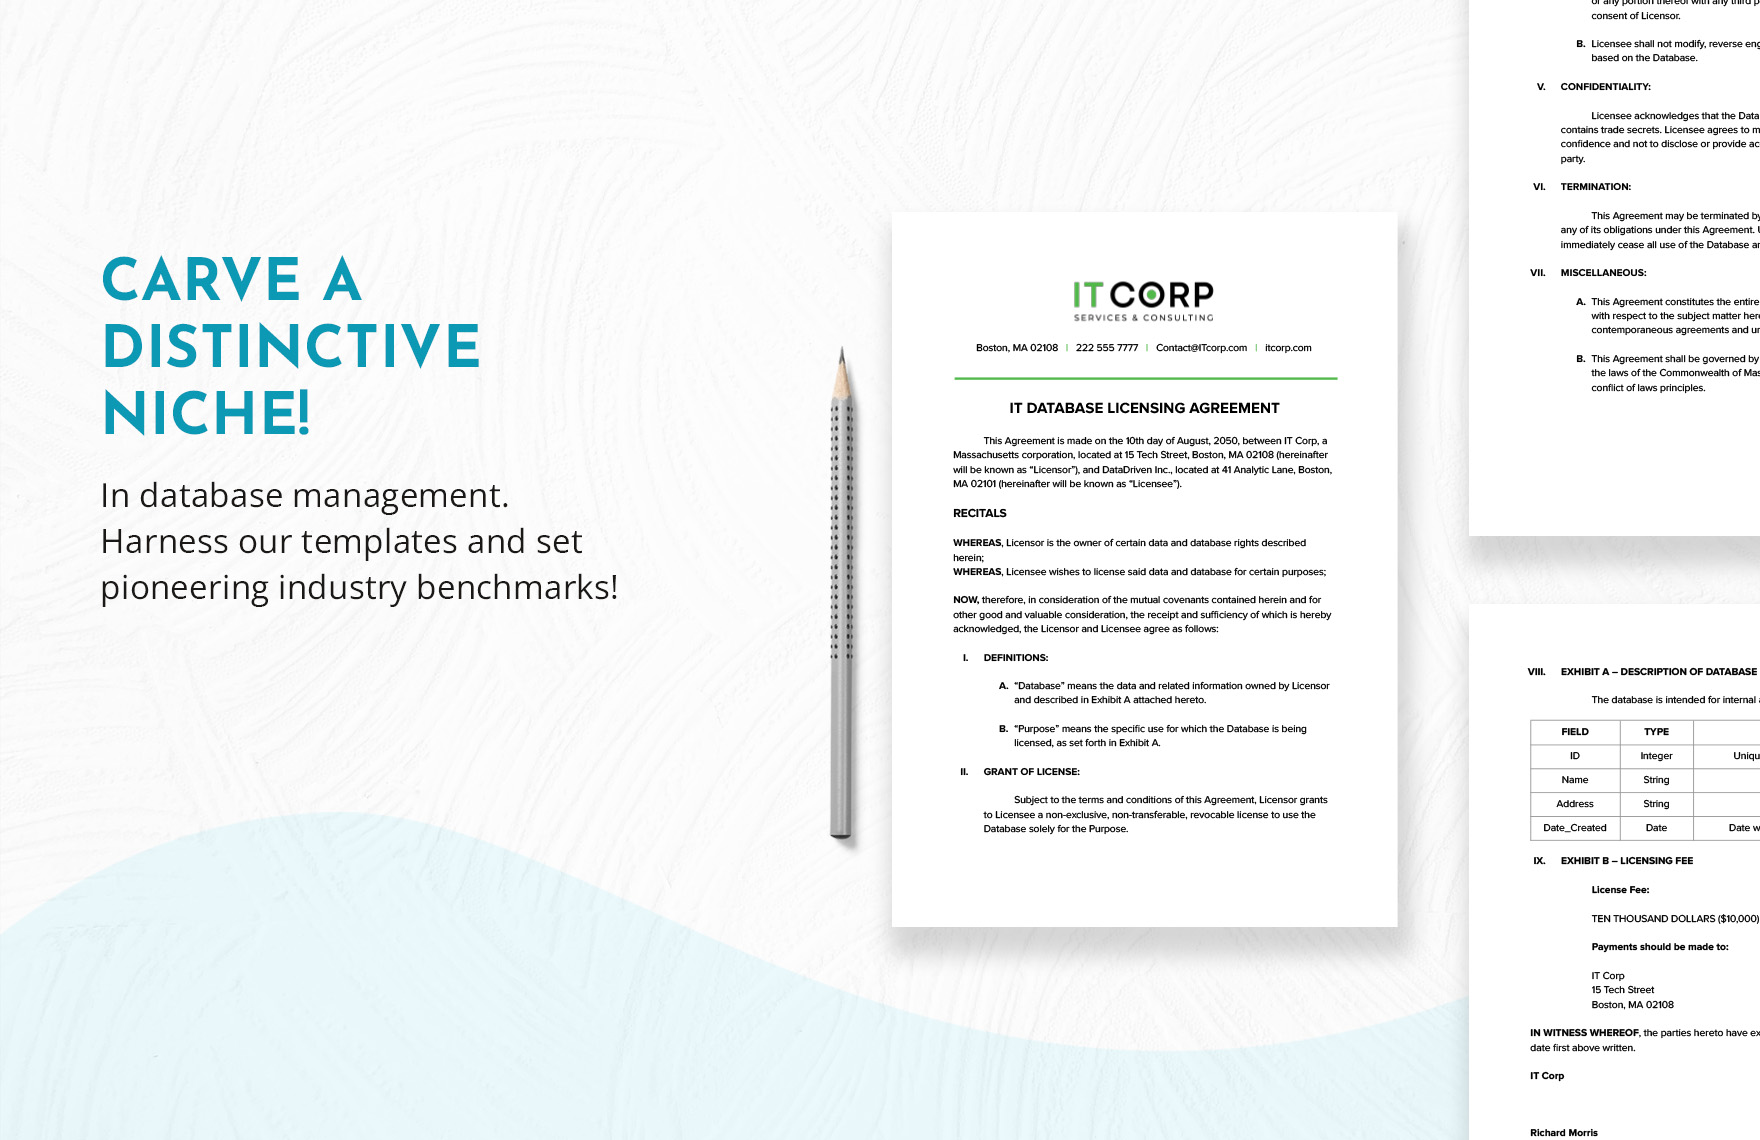 IT Database Licensing Agreement Template